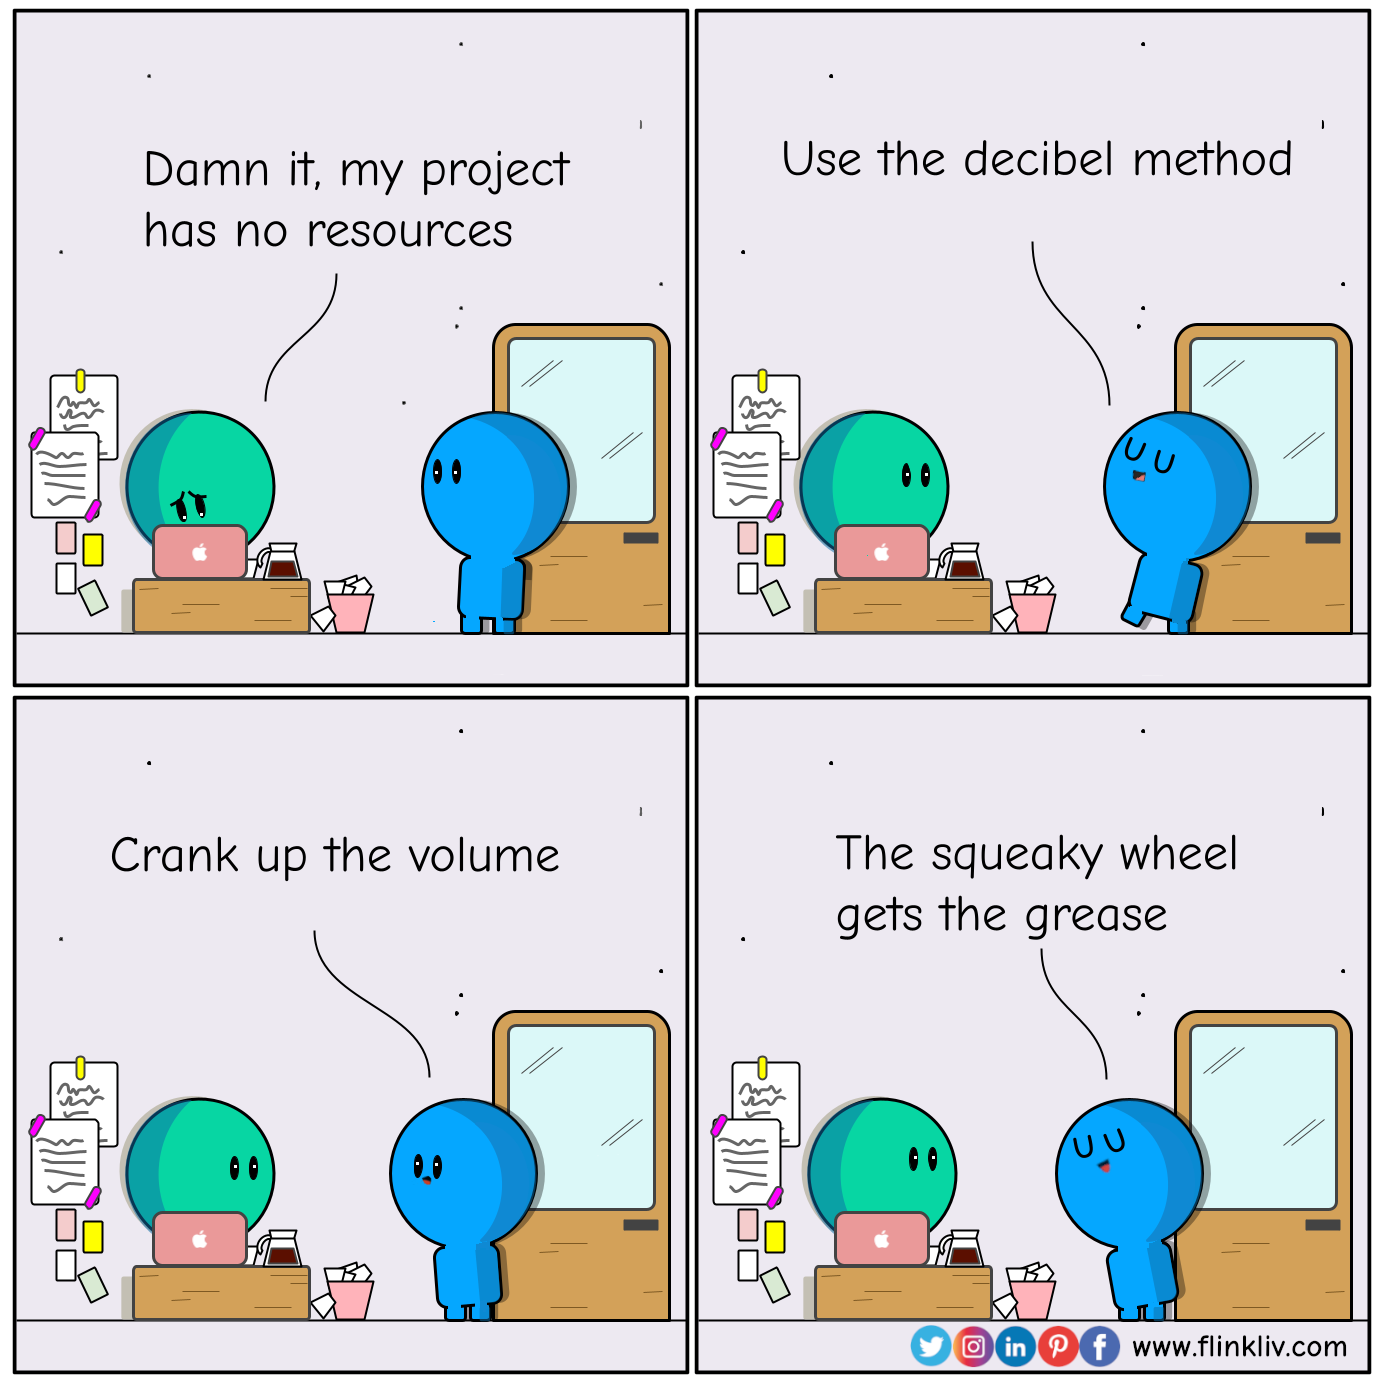 Conversation between A and B about how to speak up in a company to get resources. A: Damn it, my project has no resources B: Use the decibel method B: Crank up the volume B: The squeaky wheel gets the grease. By flinkliv.com